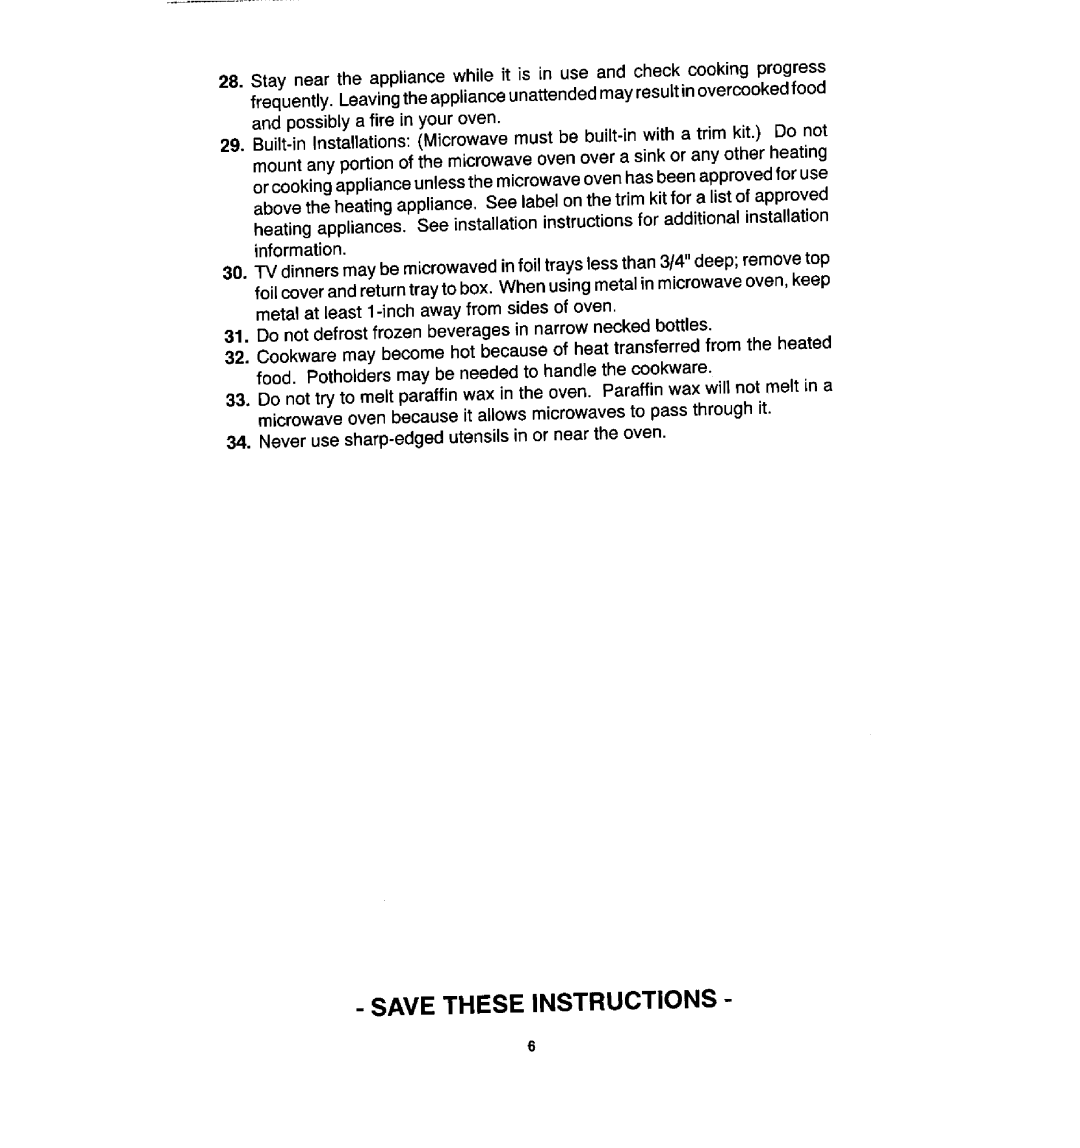 Jenn-Air M170 manual Save These Instructions 